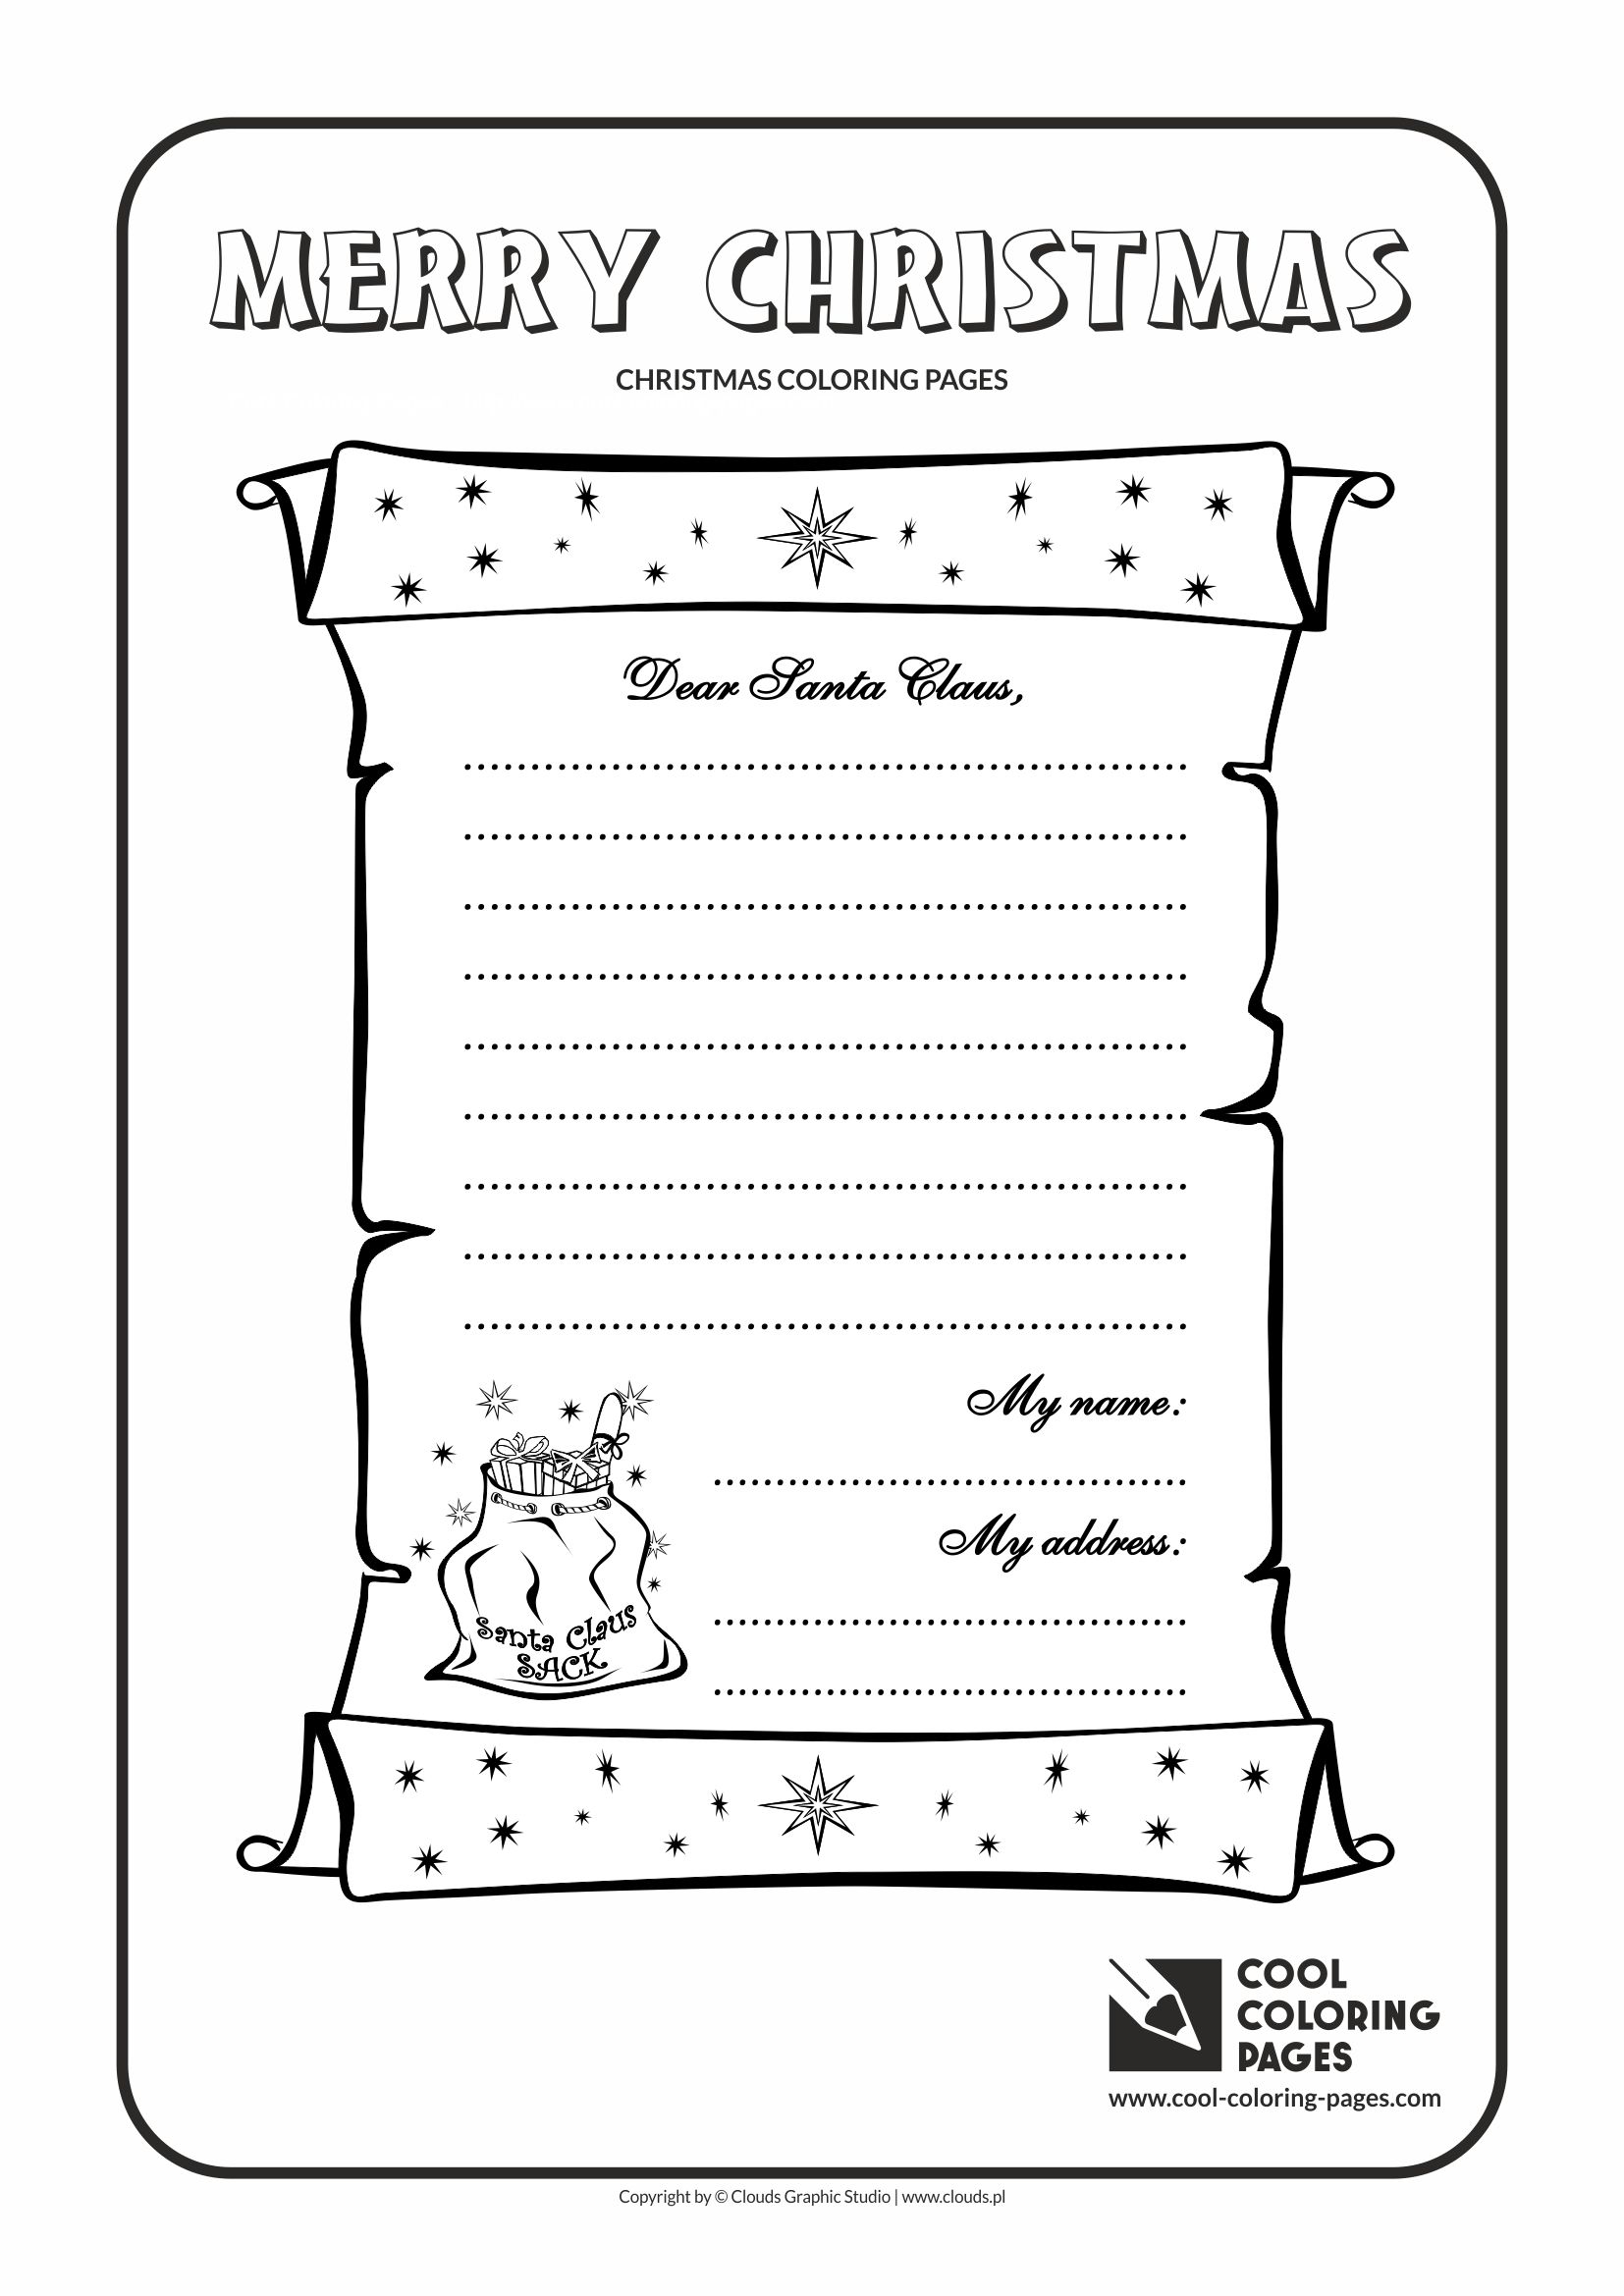 Cool Coloring Pages Letter to Santa Claus no 1 coloring page Cool